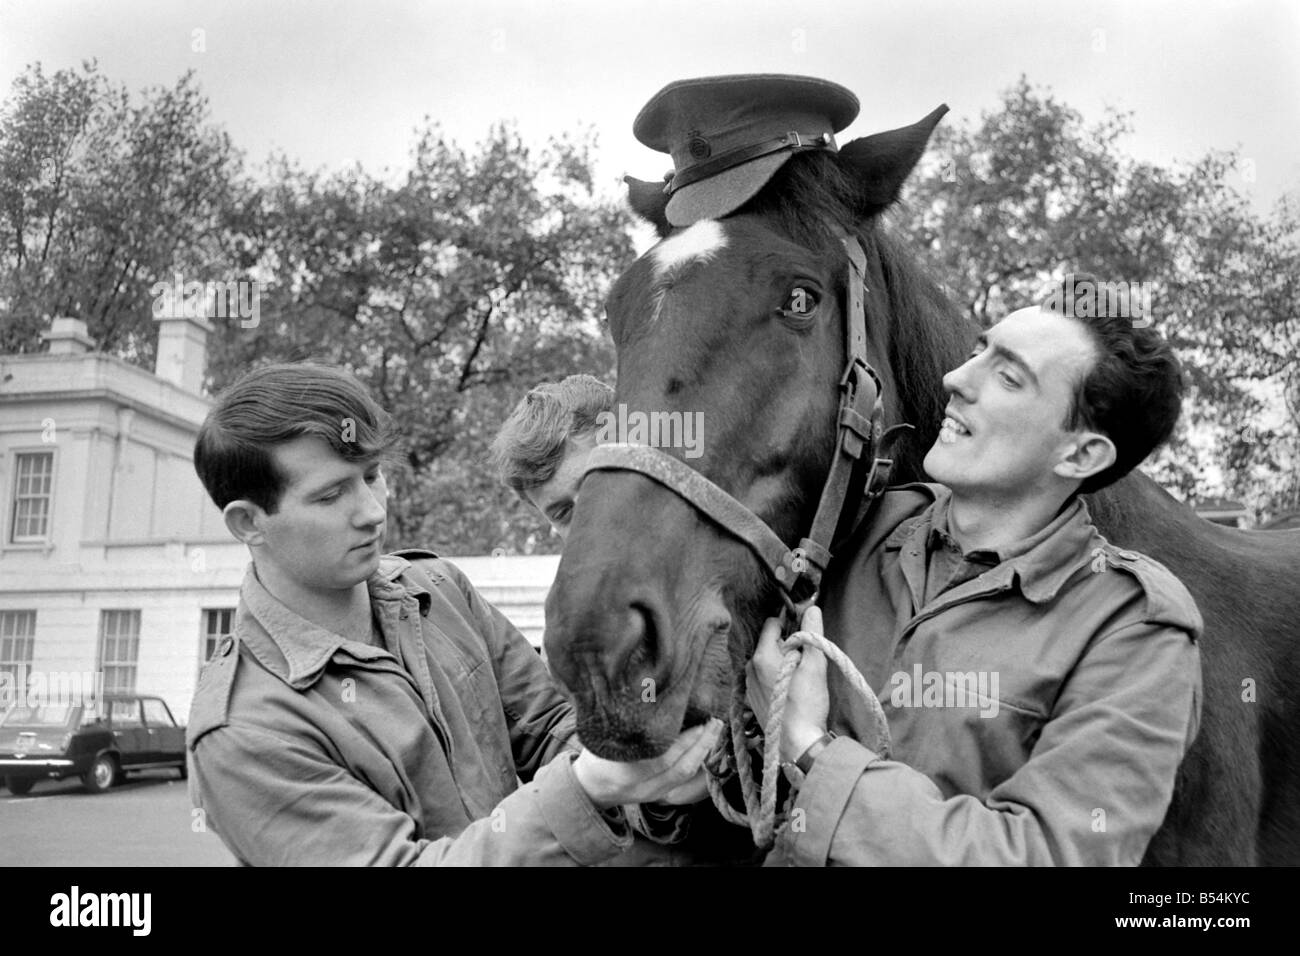 Stalin a young gelding who is one of the Queen's unwanted horses, has been given a reprieve and an attempt to re-train him is about to begin. November 1969 Z11167-005 Stock Photo